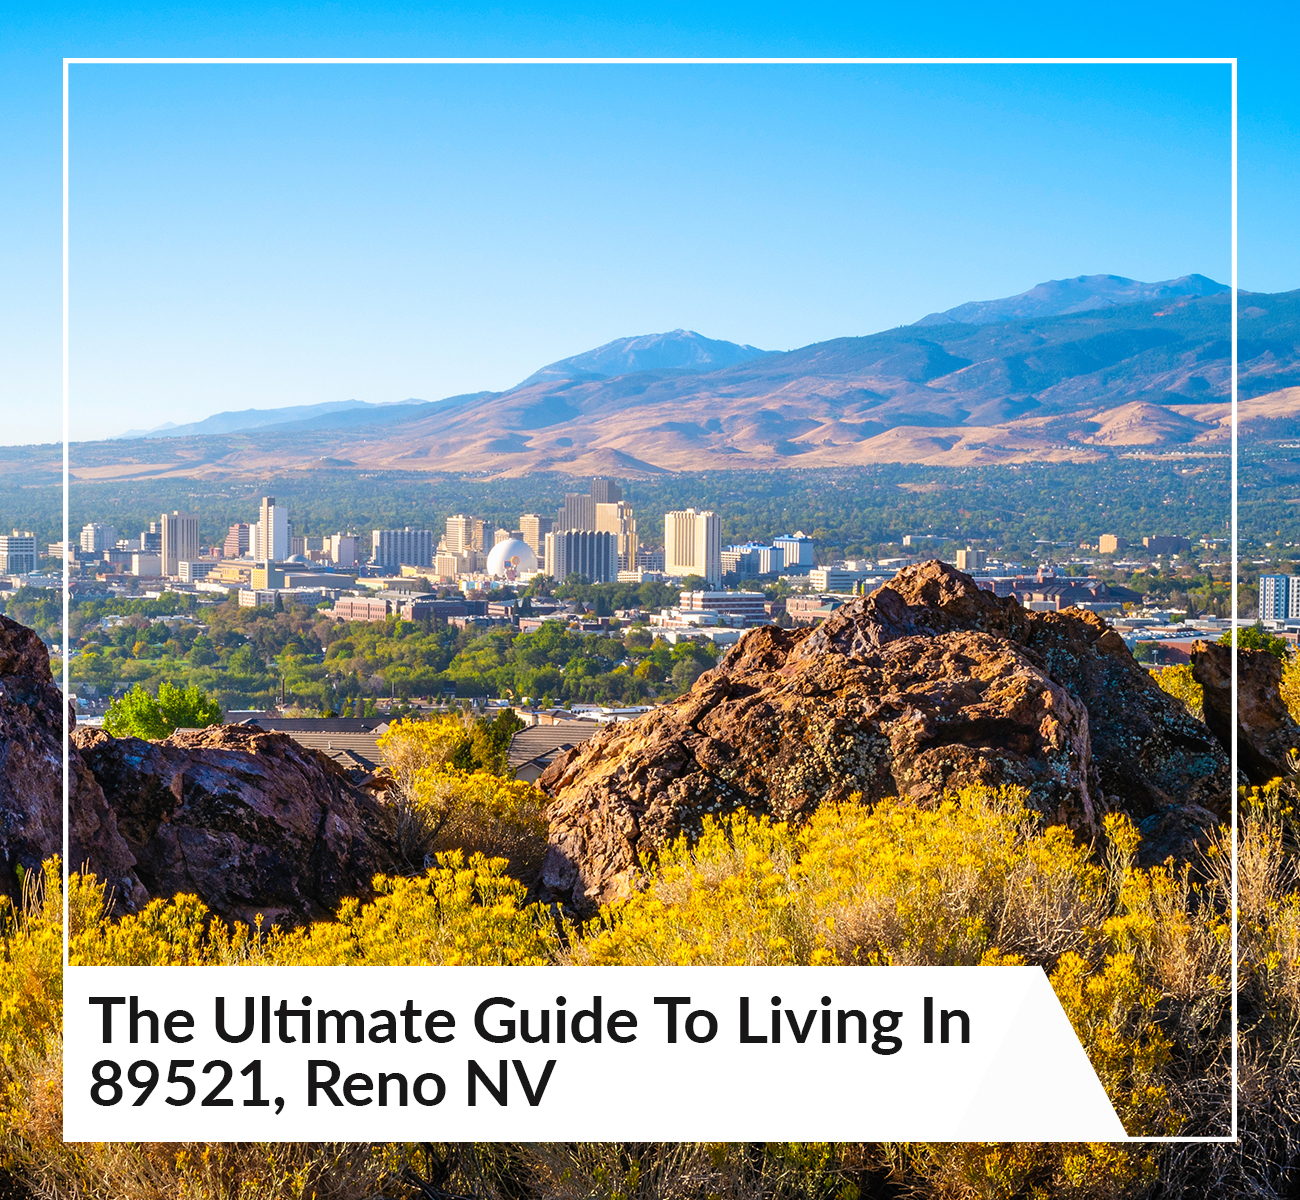 The Ultimate Guide To Living In 89521 - Main Image